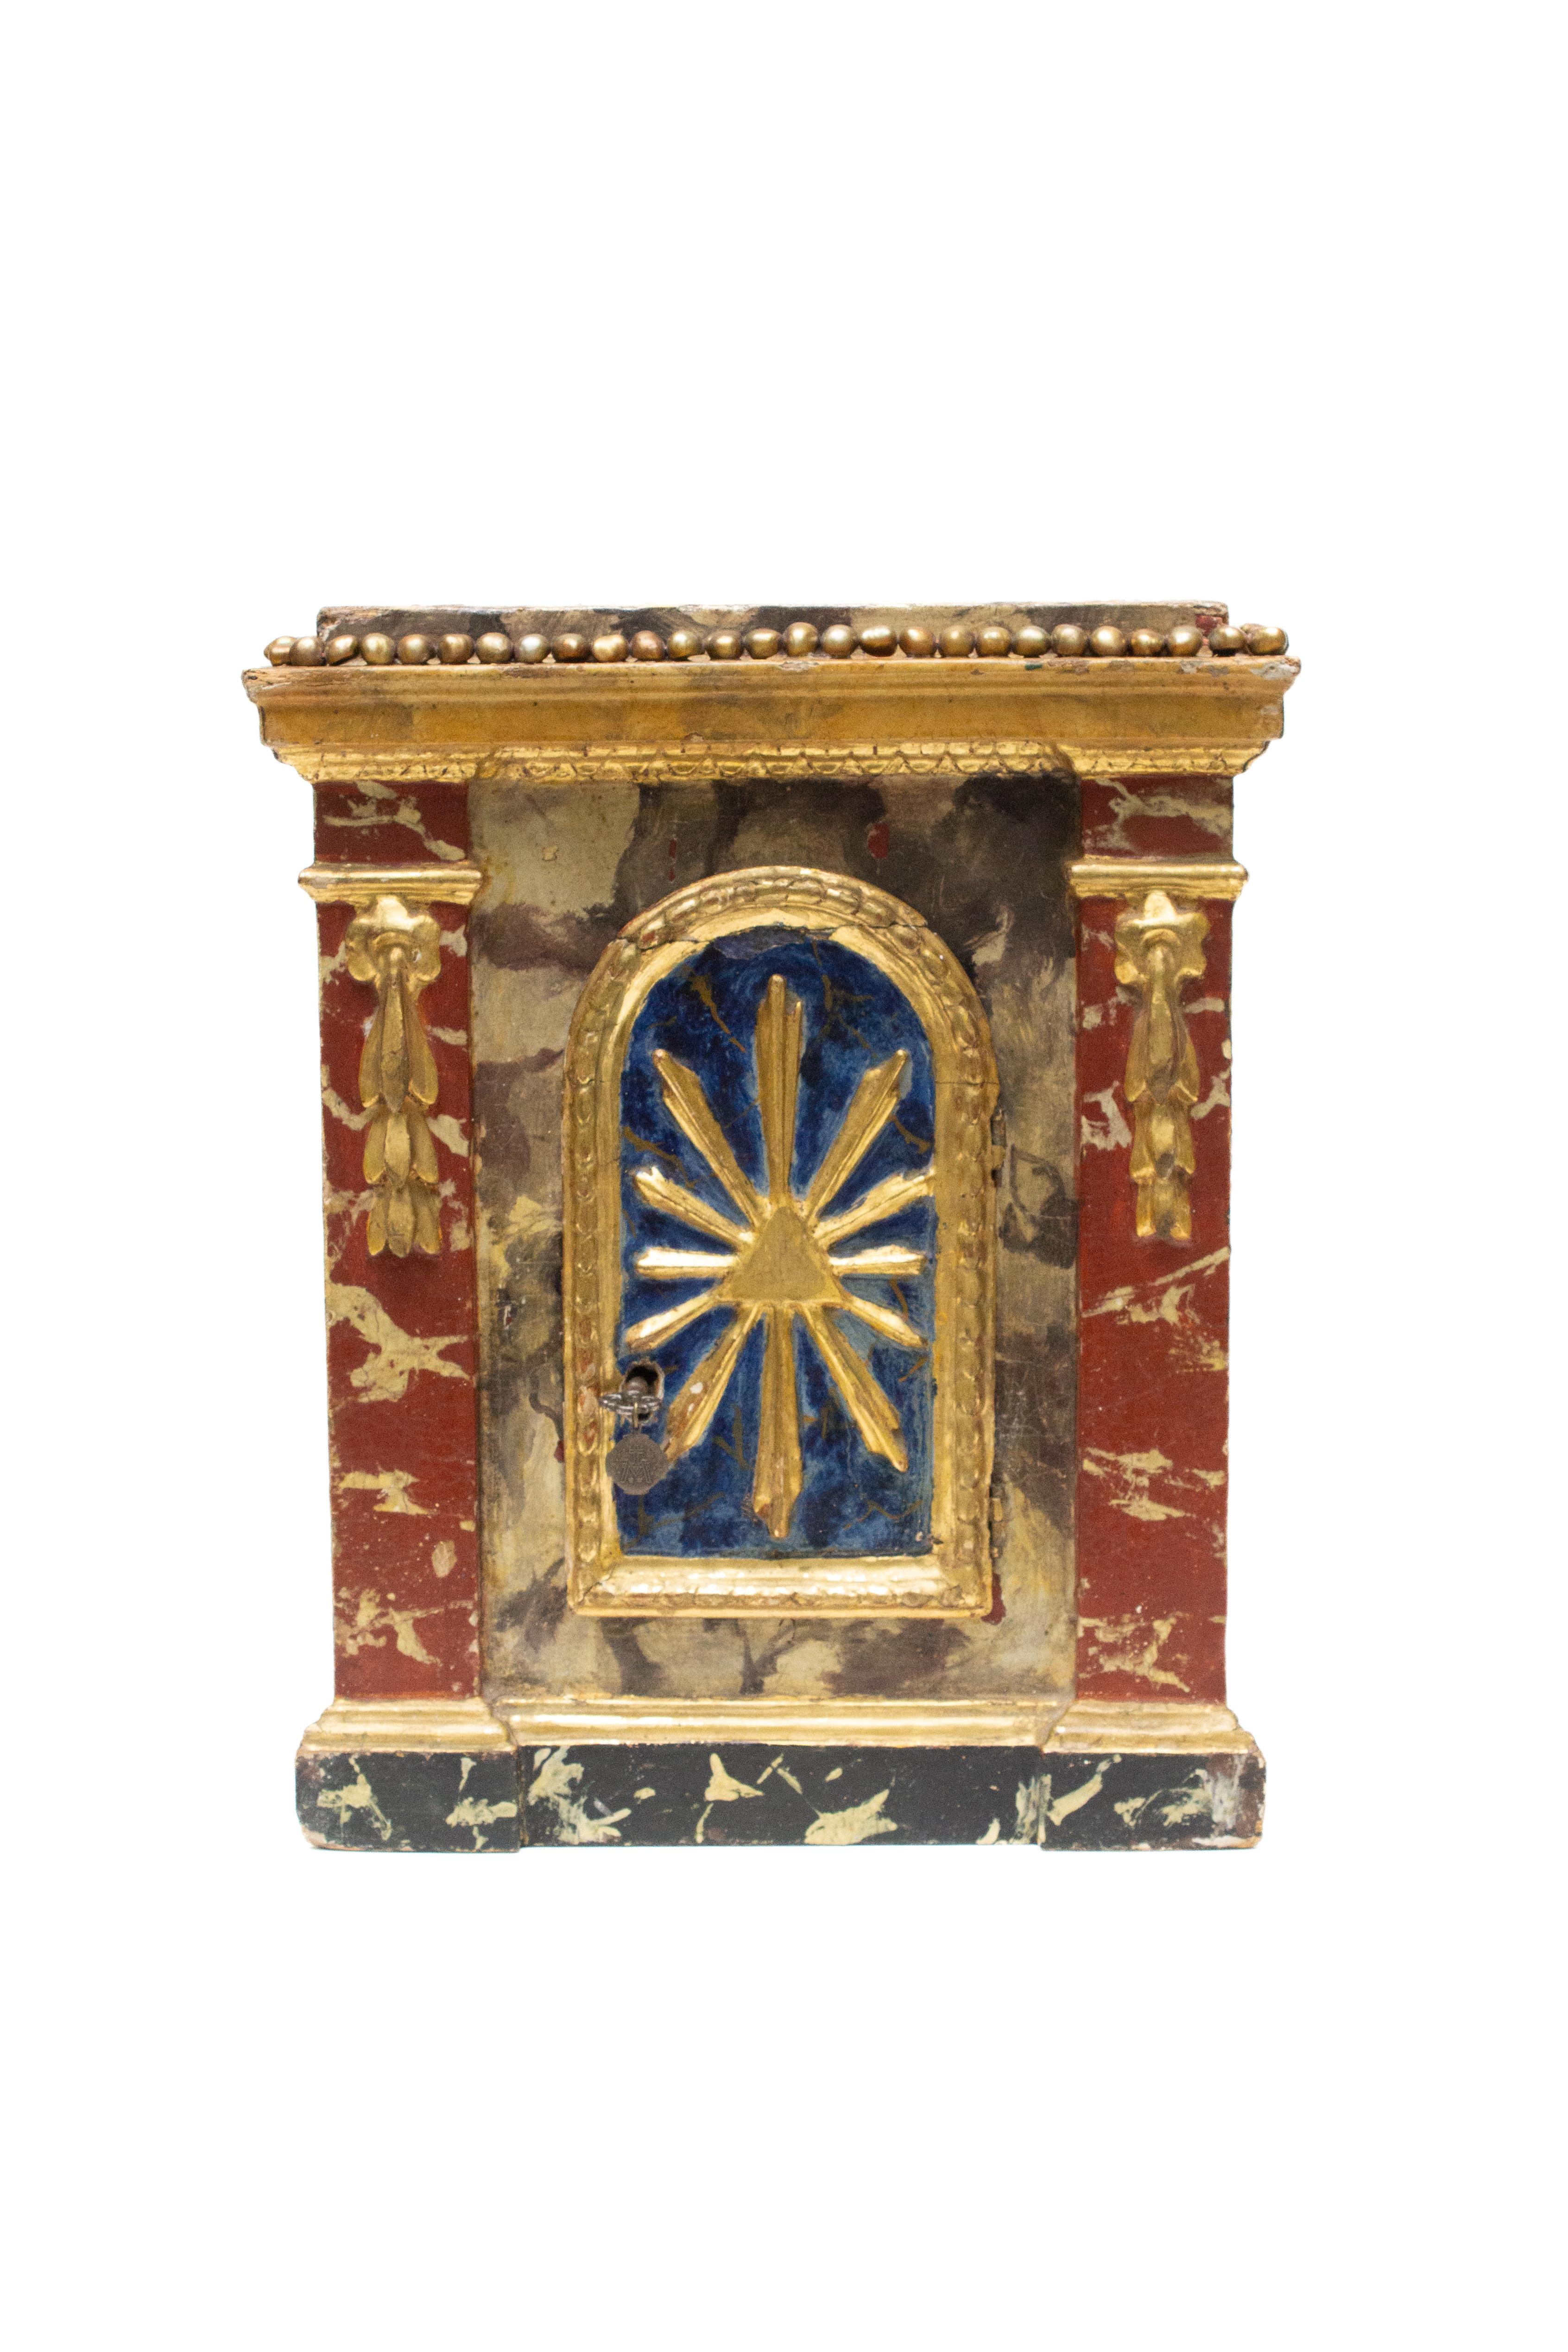 18th century Italian tabernacle with baroque pearls from Venice. It is hand-painted and carved with with gilded details and a painted marble effect. There is a gold leaf sunburst on the tabernacle door with the original key which has an image of